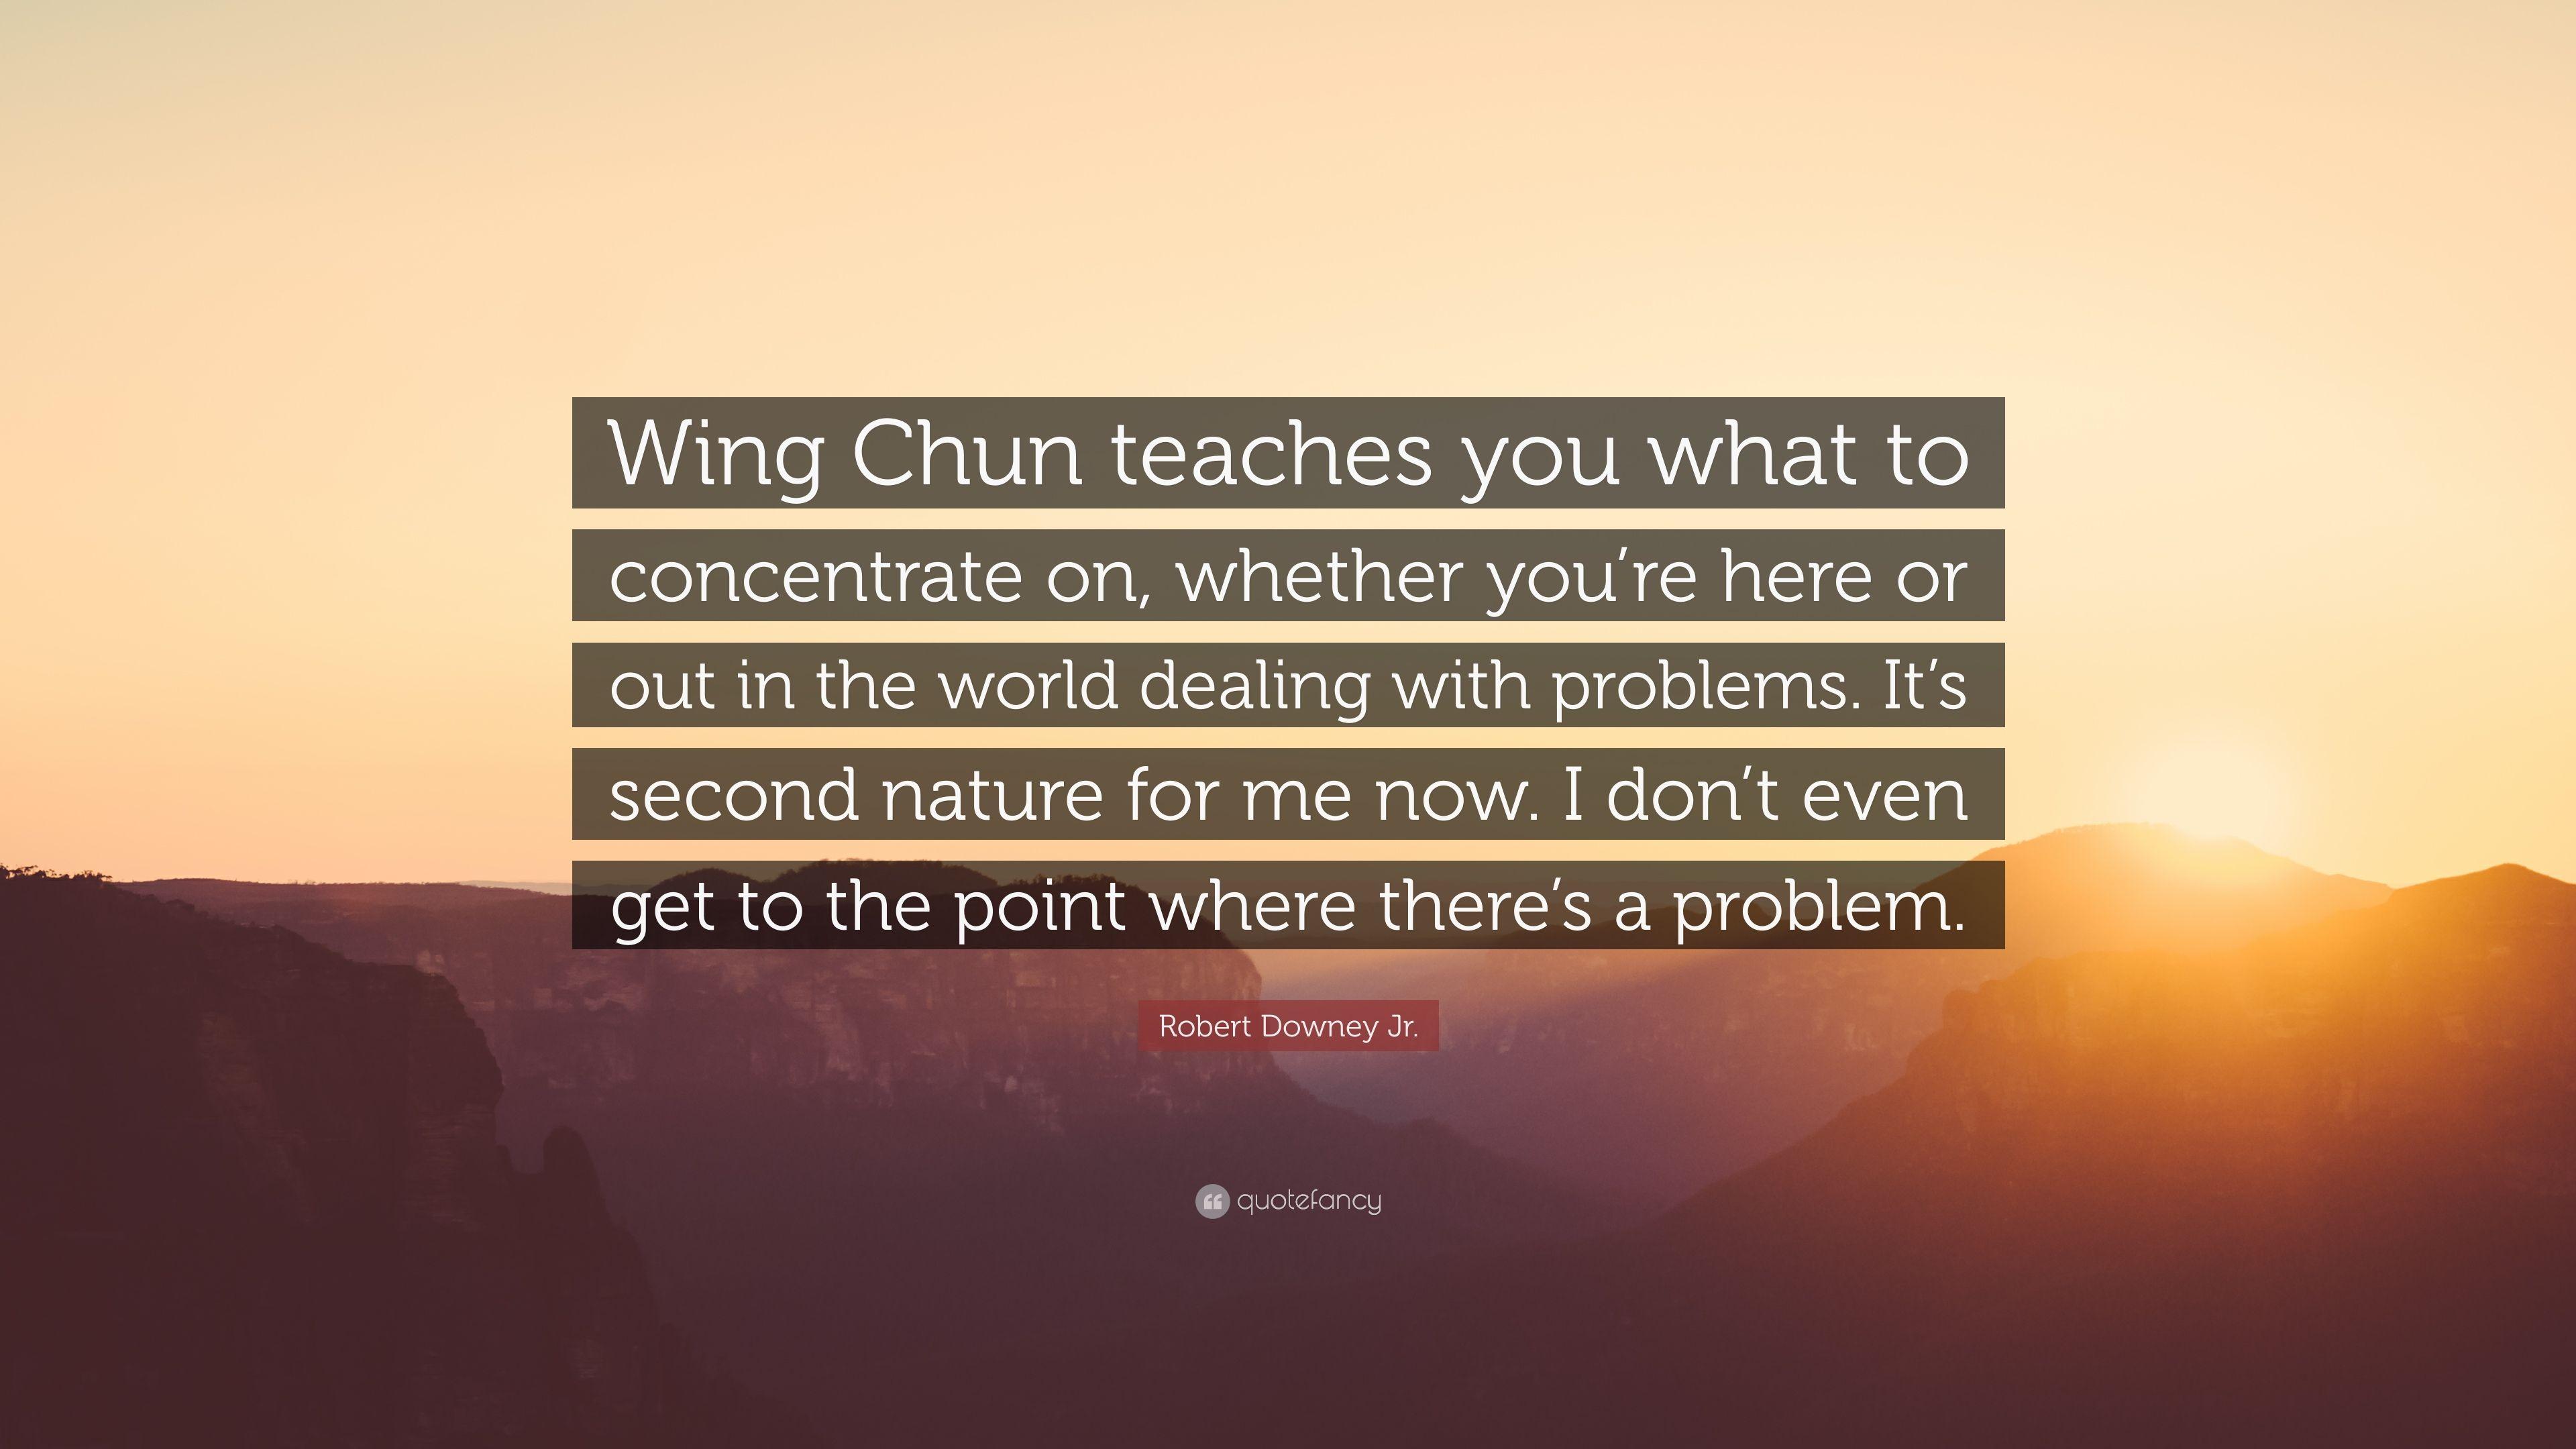 Robert Downey Jr. Quote: “Wing Chun teaches you what to concentrate